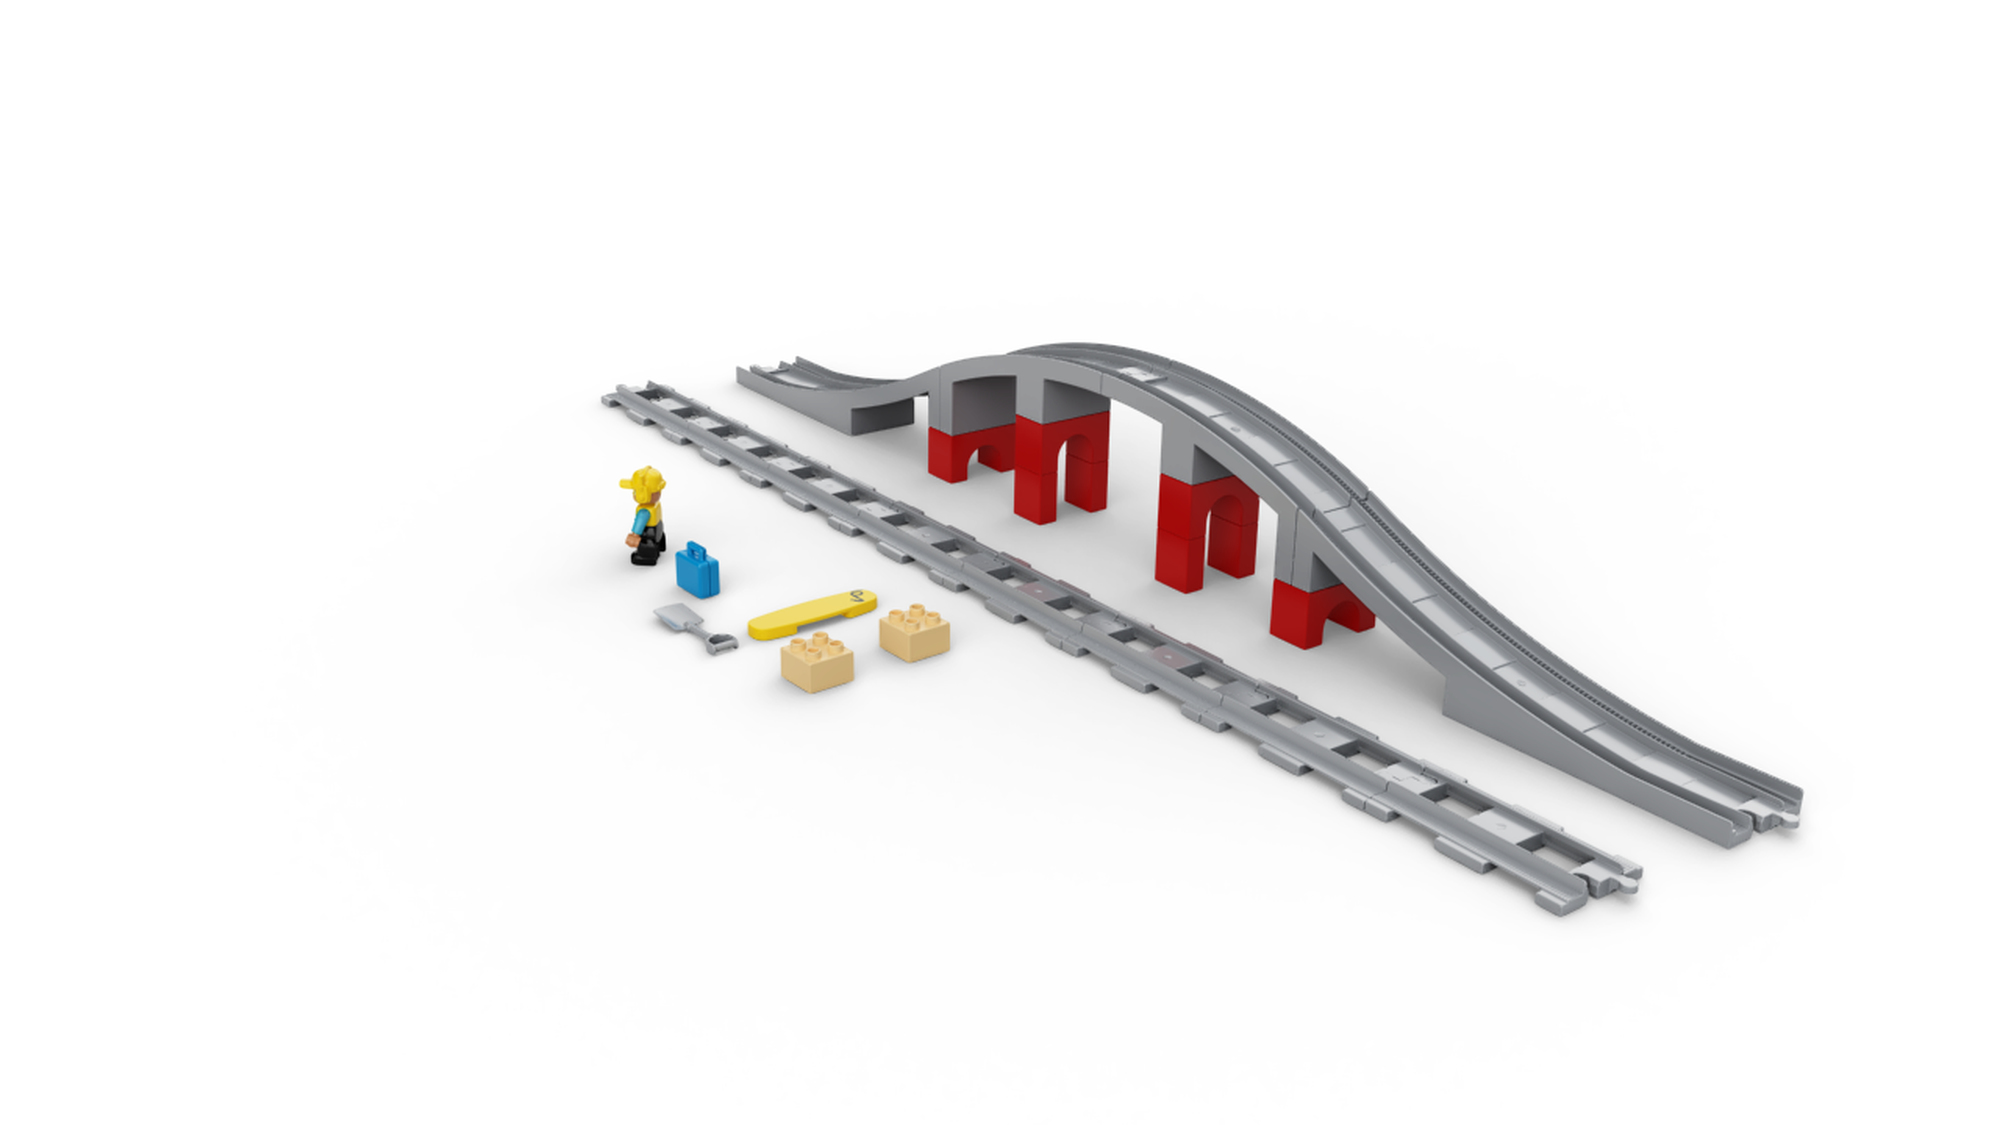 How to extend your LEGO DUPLO Steam Train set - Train Tracks and